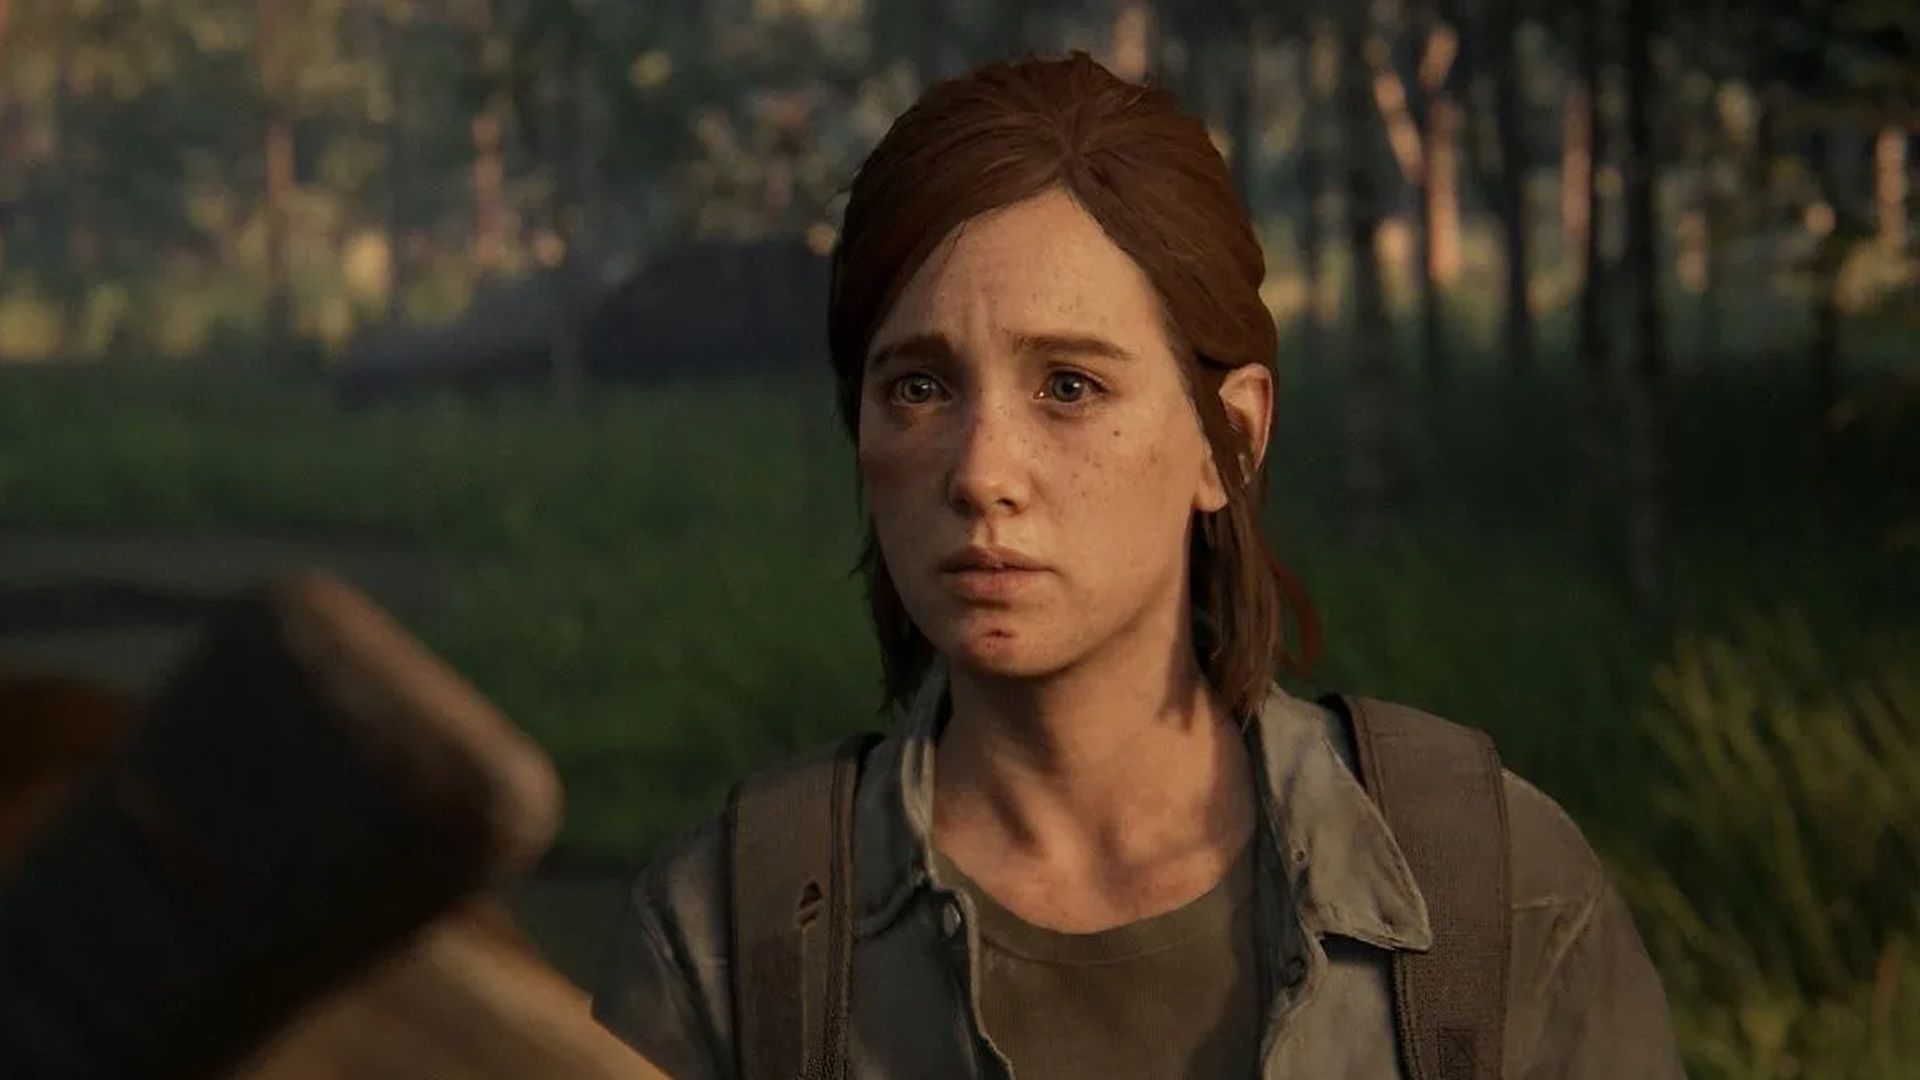 The Last of Us Part I PC Port Is Awful Despite Naughty Dog Hot Fix